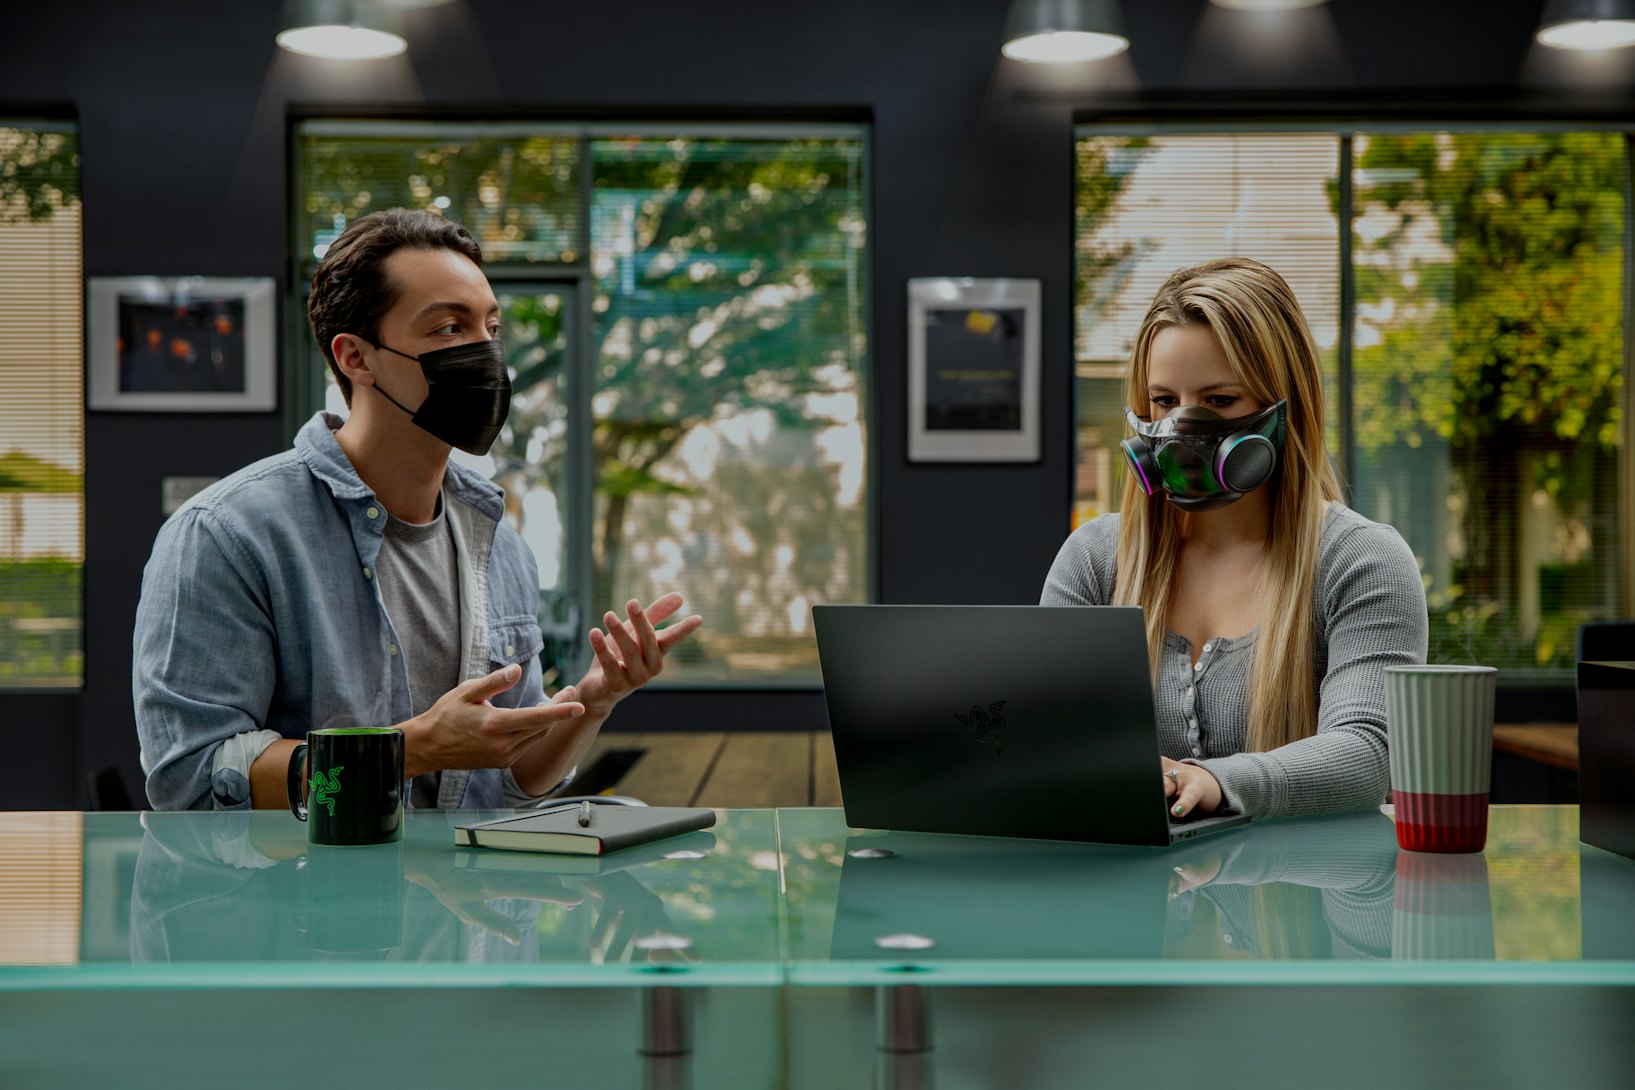 Razer Zephyr mask being used in a coffee shop